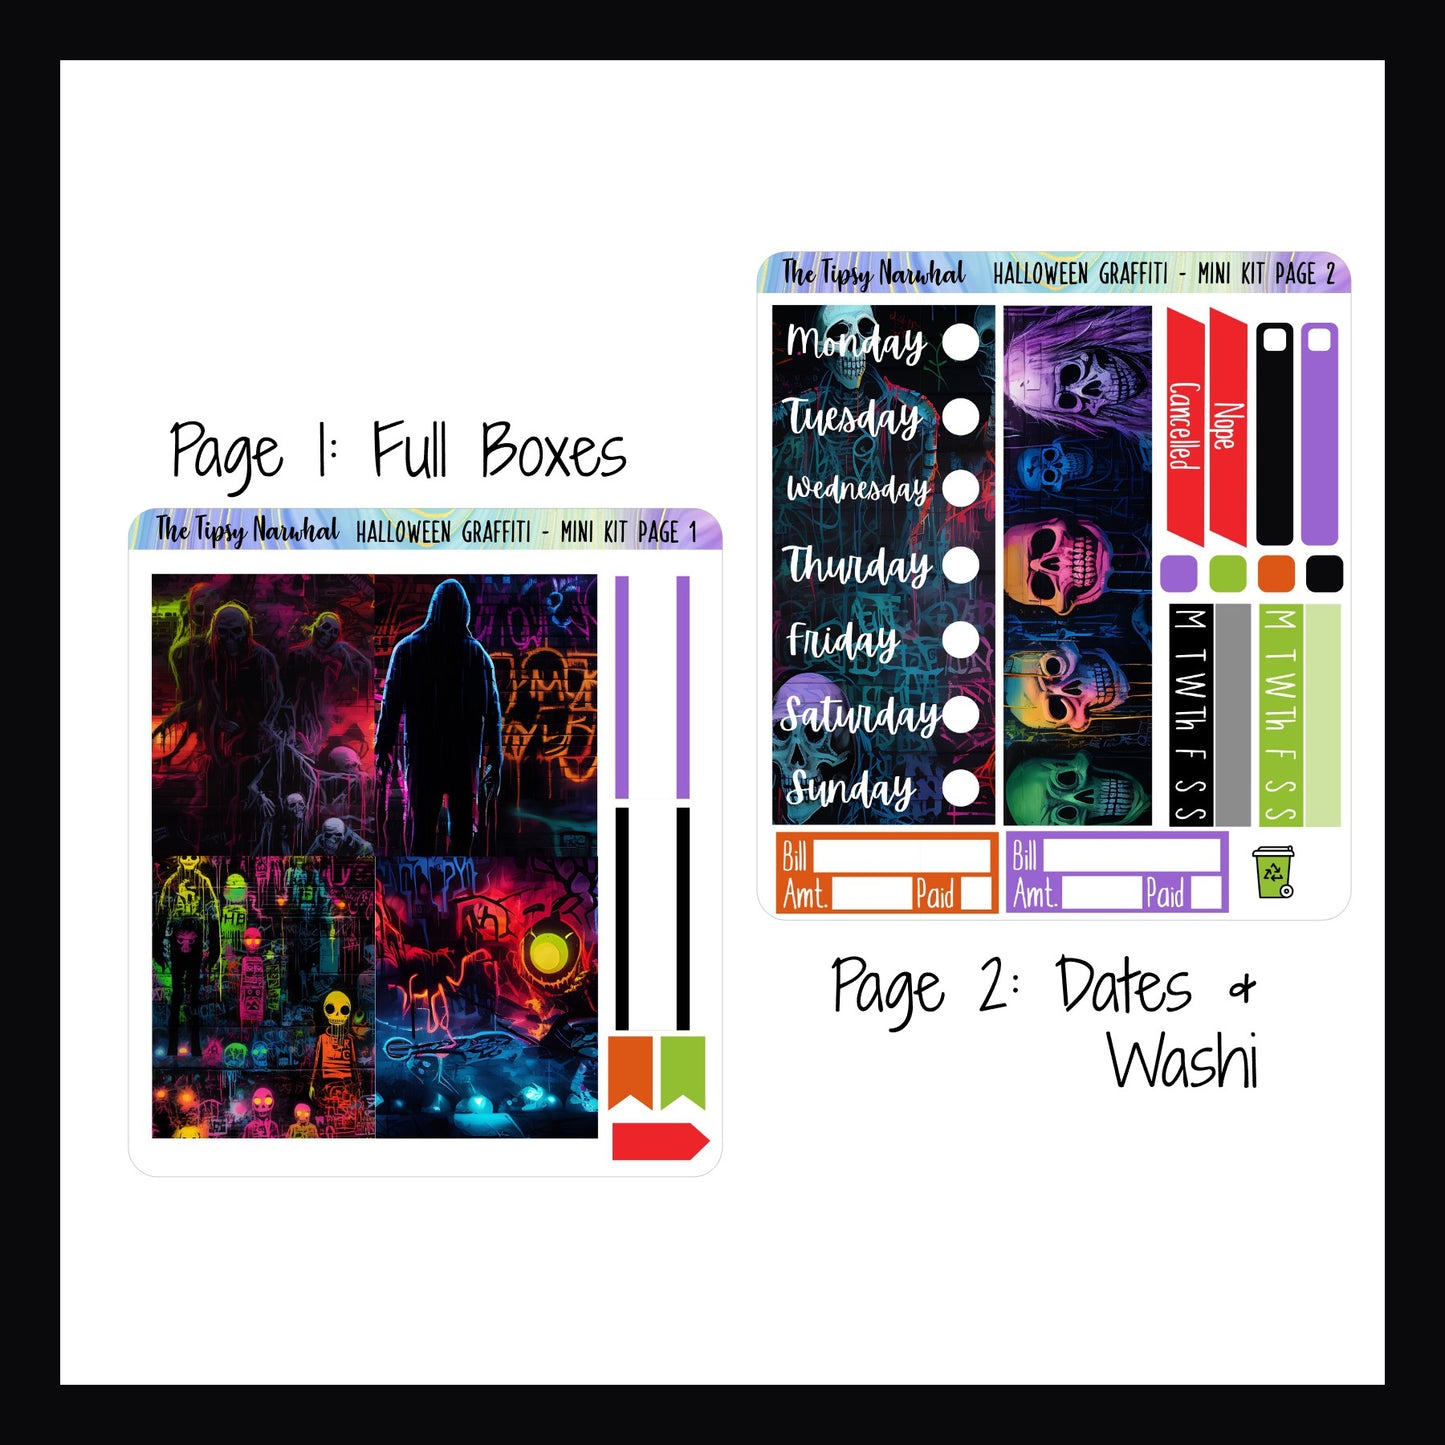 Halloween Graffiti Mini Vertical Kit Pages 1 and 2, Washi Stickers, Date Covers, Habit Trackers, Full Box Decor, Skinny stickers, Bill Tracking, Flag stickers, Skull stickers, Graffiti Art Style, Halloween Stickers, Scary Sticker, Spooky Stickers, Bright Colors, 